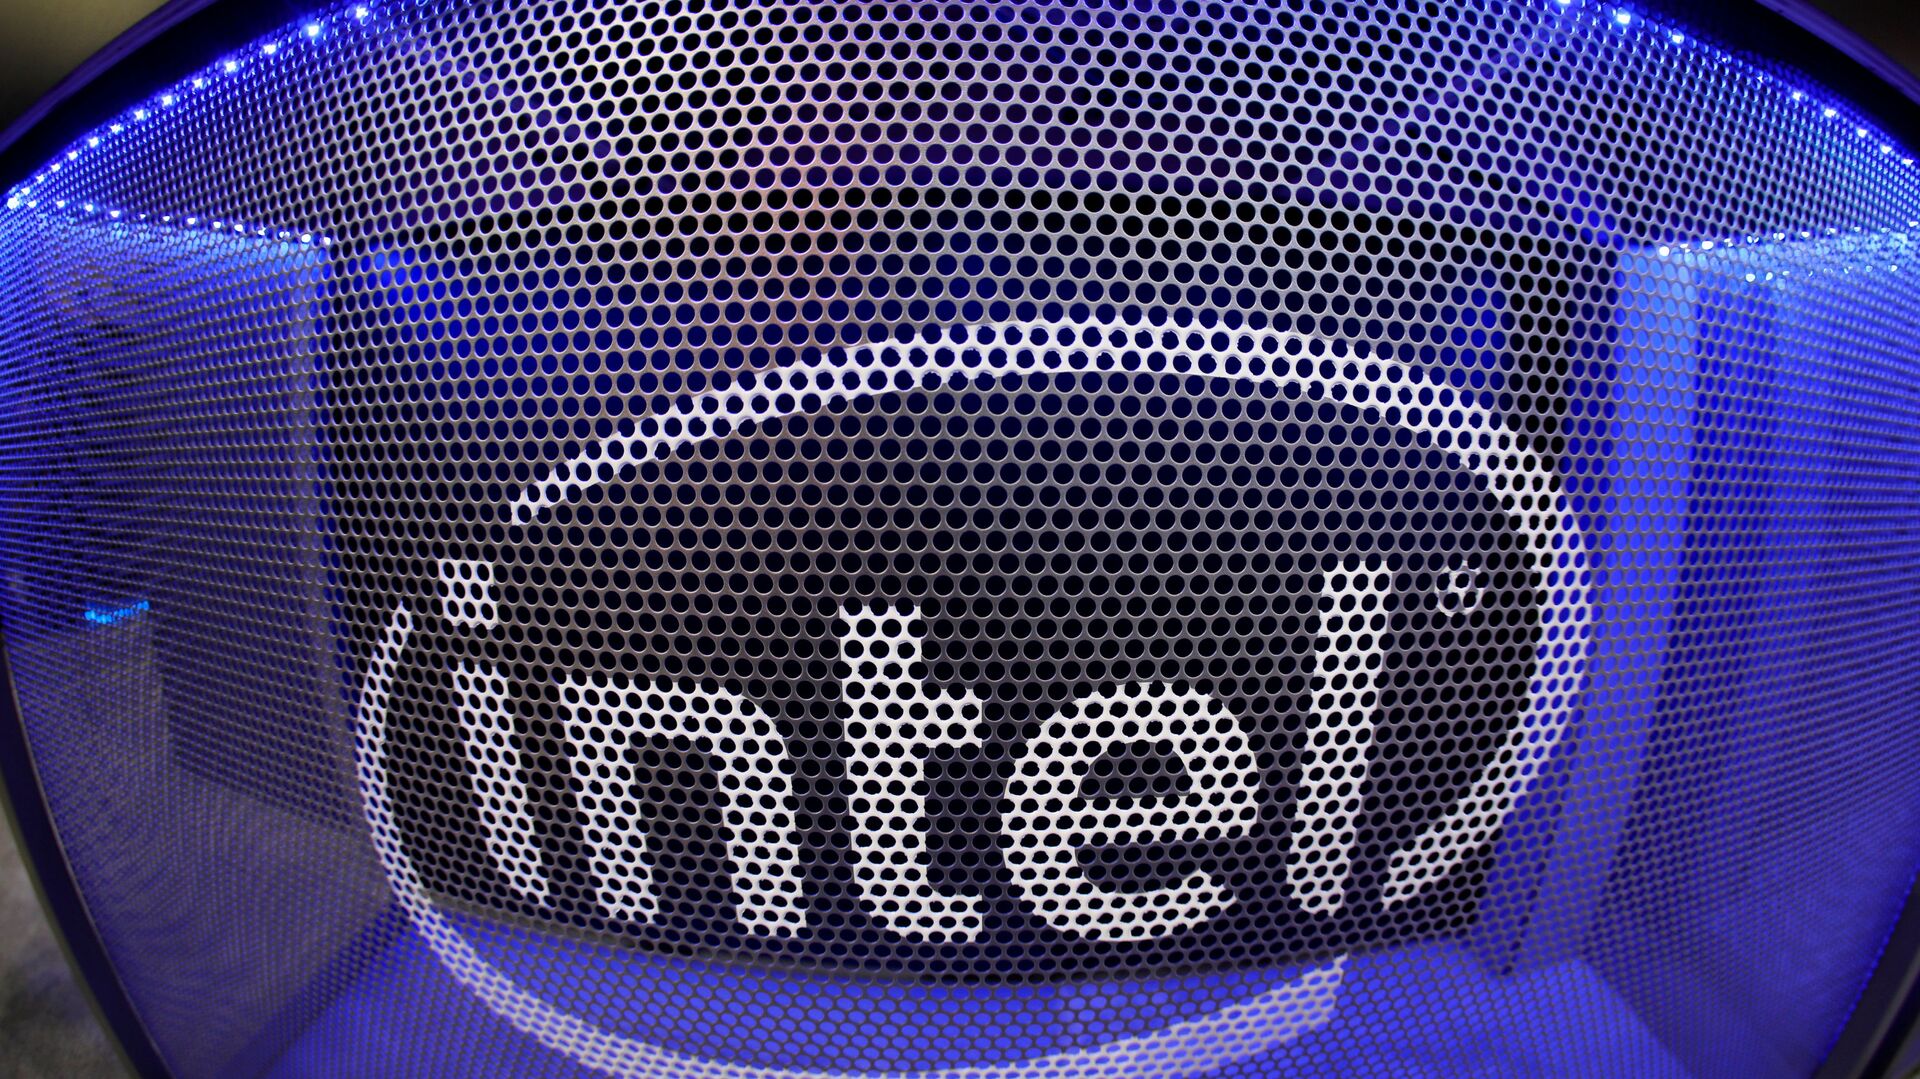  Computer chip maker Intel's logo is shown on a gaming computer display during the opening day of E3, the annual video games expo revealing the latest in gaming software and hardware in Los Angeles, California, U.S., June 11, 2019.   - Sputnik International, 1920, 17.03.2022